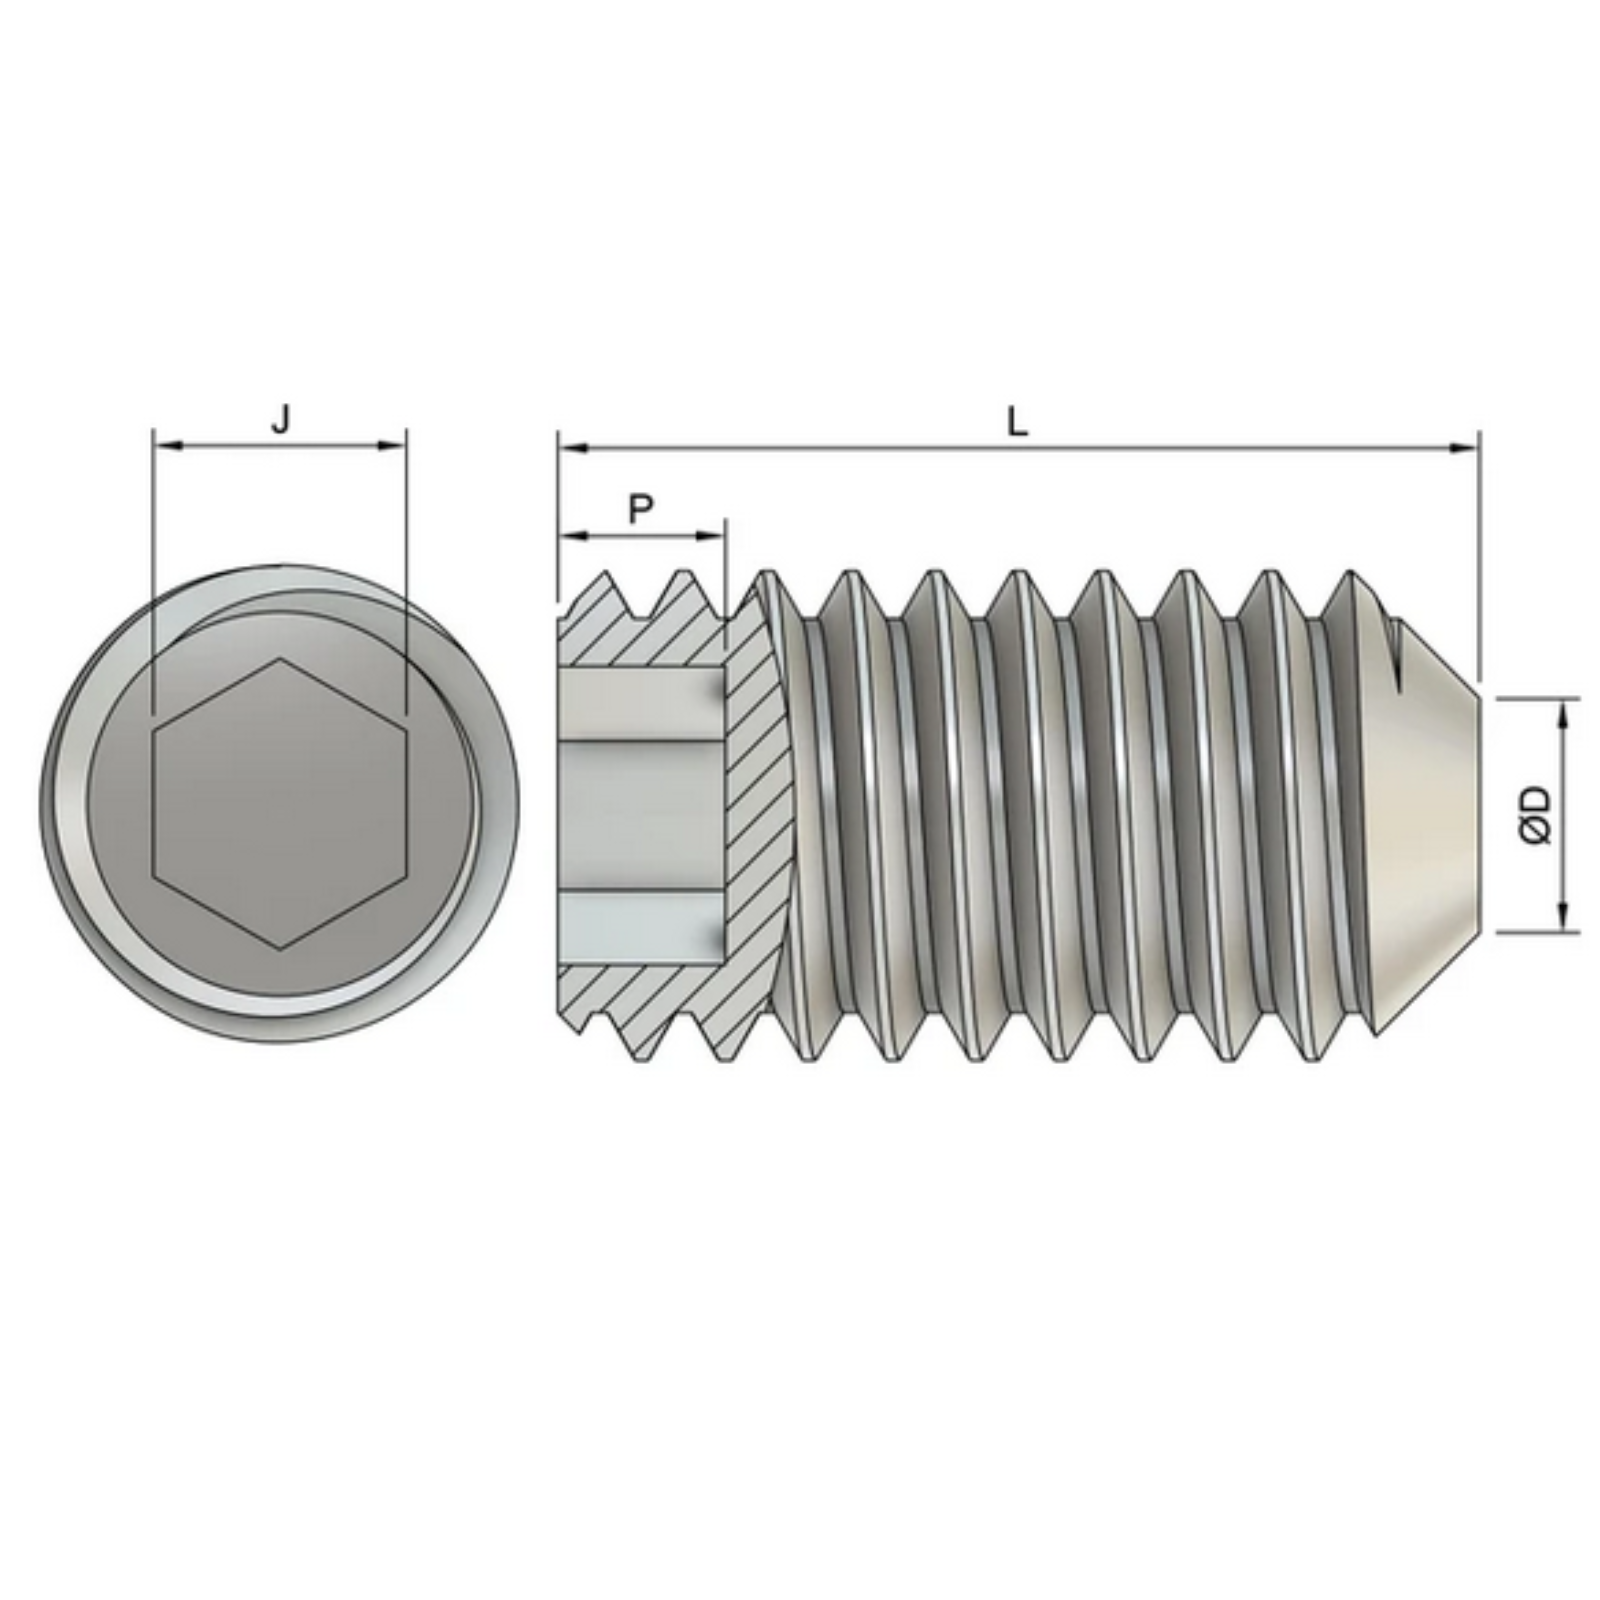 M2 Cup Point Set / Grub Screws (DIN 916) - Stainless Steel (A2)